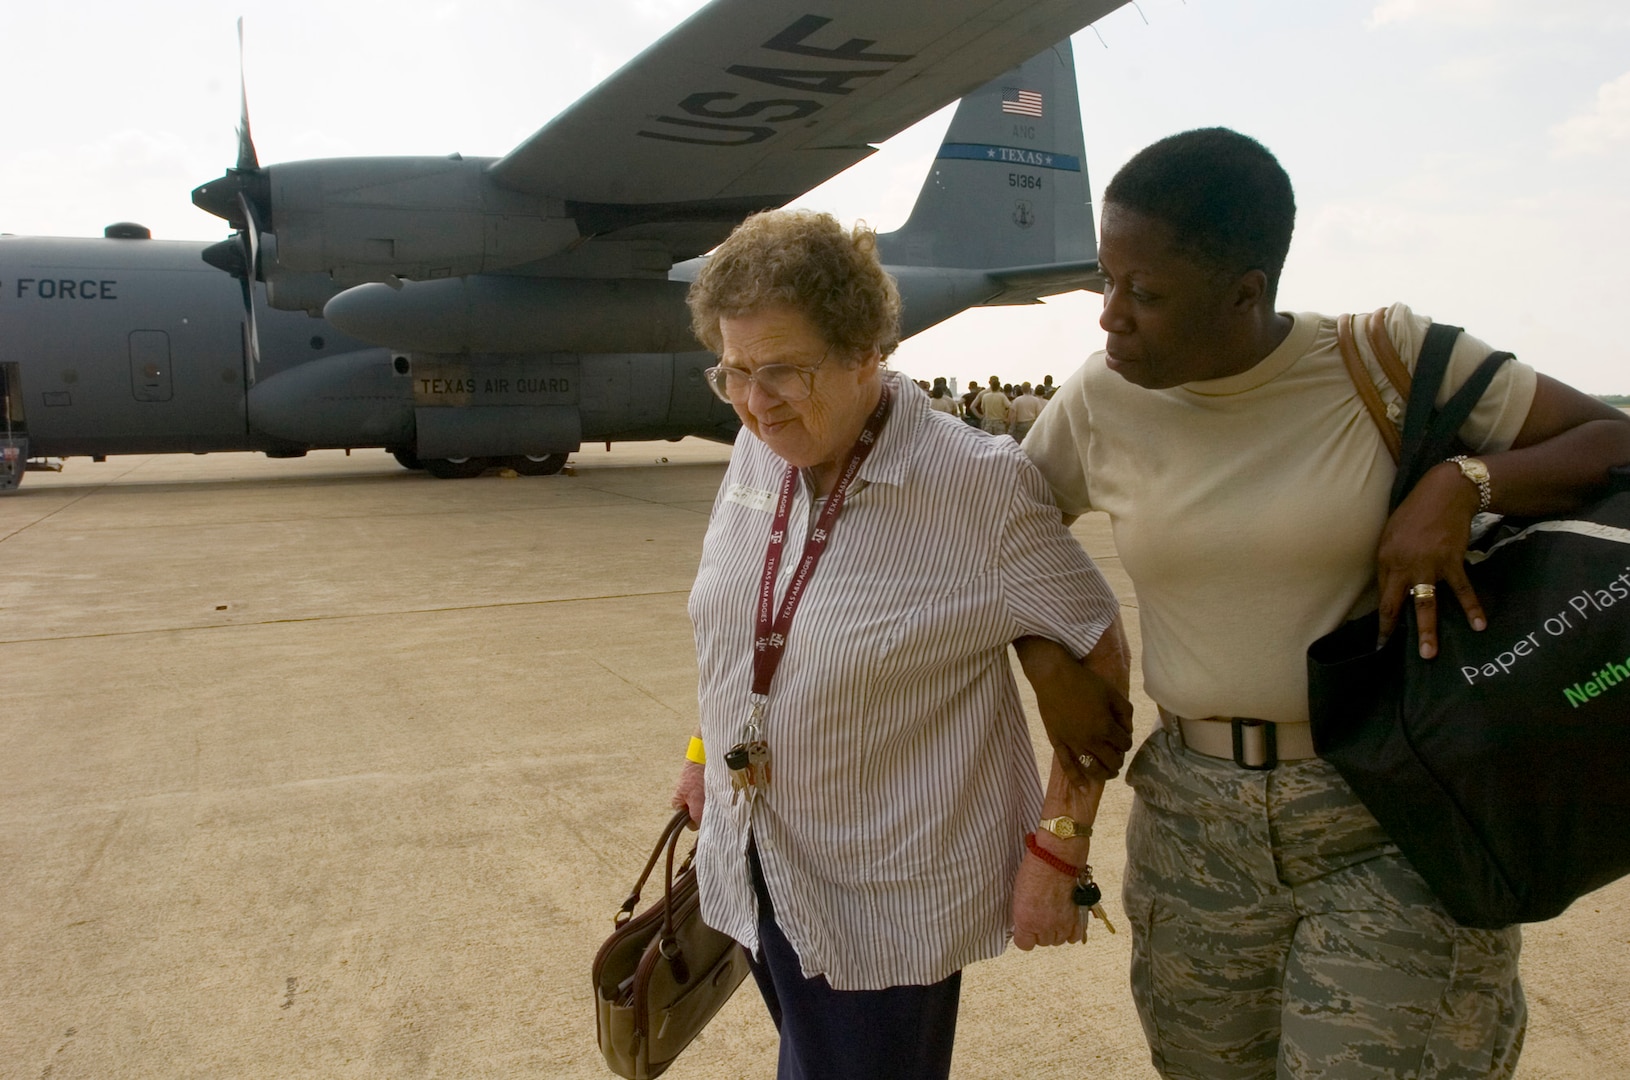 Master Sgt. Robin Williams escorts an elderly woman inside the 37th Operations Support Squadron hangar on the former Kelly Air Force Base, Texas. The Texas Air National Guard C-130 brought 23 evacuees from Beaumont, Texas, to San Antonio before Hurricane Gustav reached the Gulf Coast.  Members from the 37th Training Wing and 59th Medical Wing at Lackland AFB, Texas, and from the Air National Guard and Air Force Reserve help in the hurricane relief efforts as Hurricane Gustav approaches the Gulf Coast. The Port of San Antonio on Kelly AFB is the staging base for FEMA Region 6.  Sergeant Williams is the assistant course supervisor for the Phase II Aerospace Medical Service Apprentice Course for the 59th Training Squadron Lackland AFB, Texas. (U.S. Air Force photo/Staff Sgt. Desiree N. Palacios)